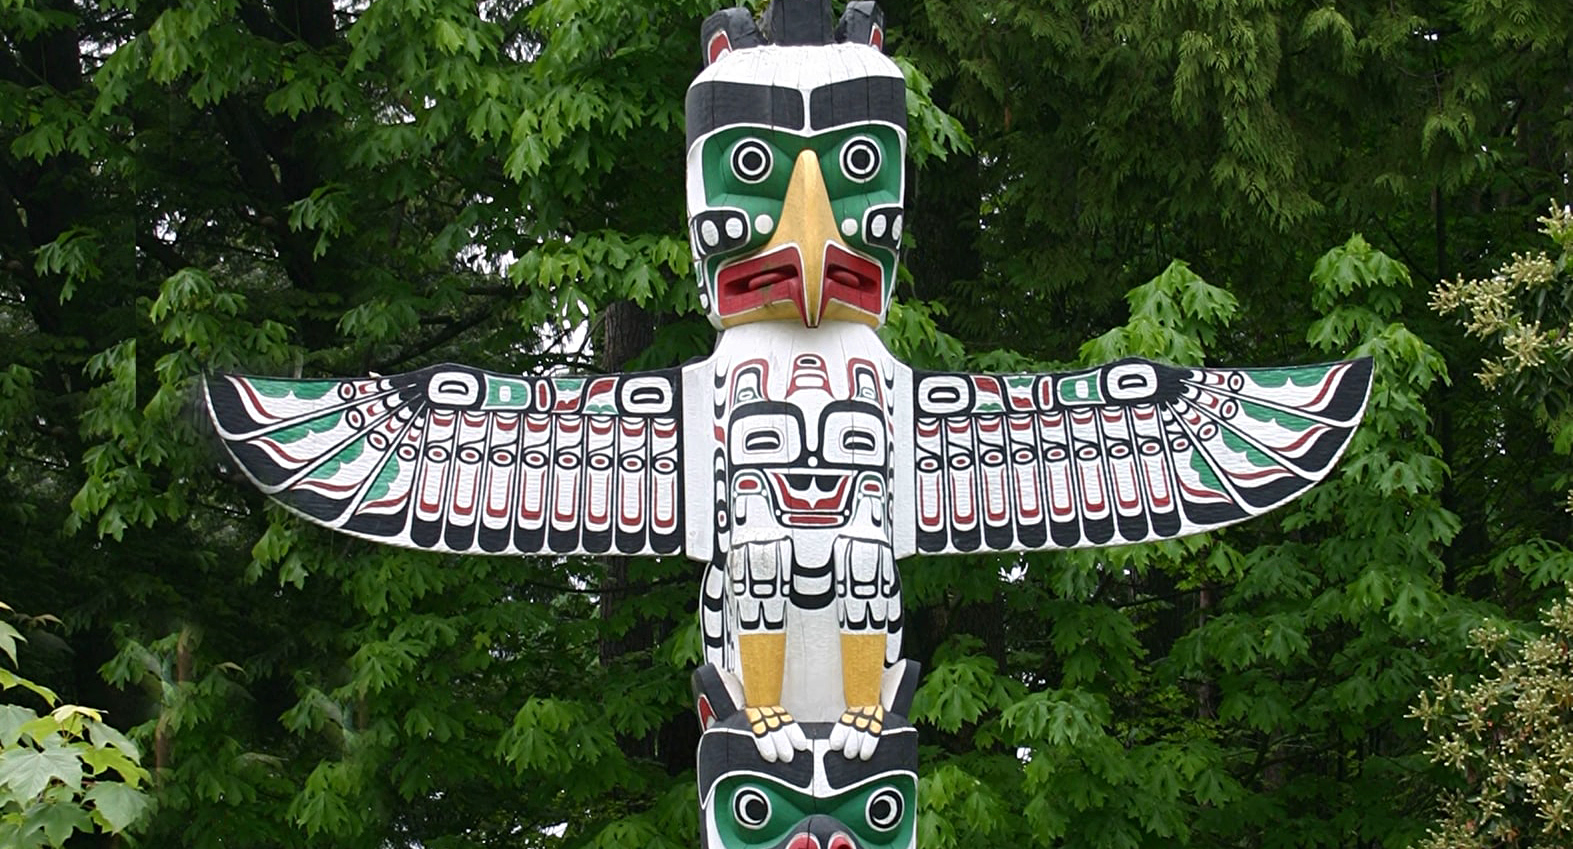 Semiotics: A totem pole has faces with many different meanings